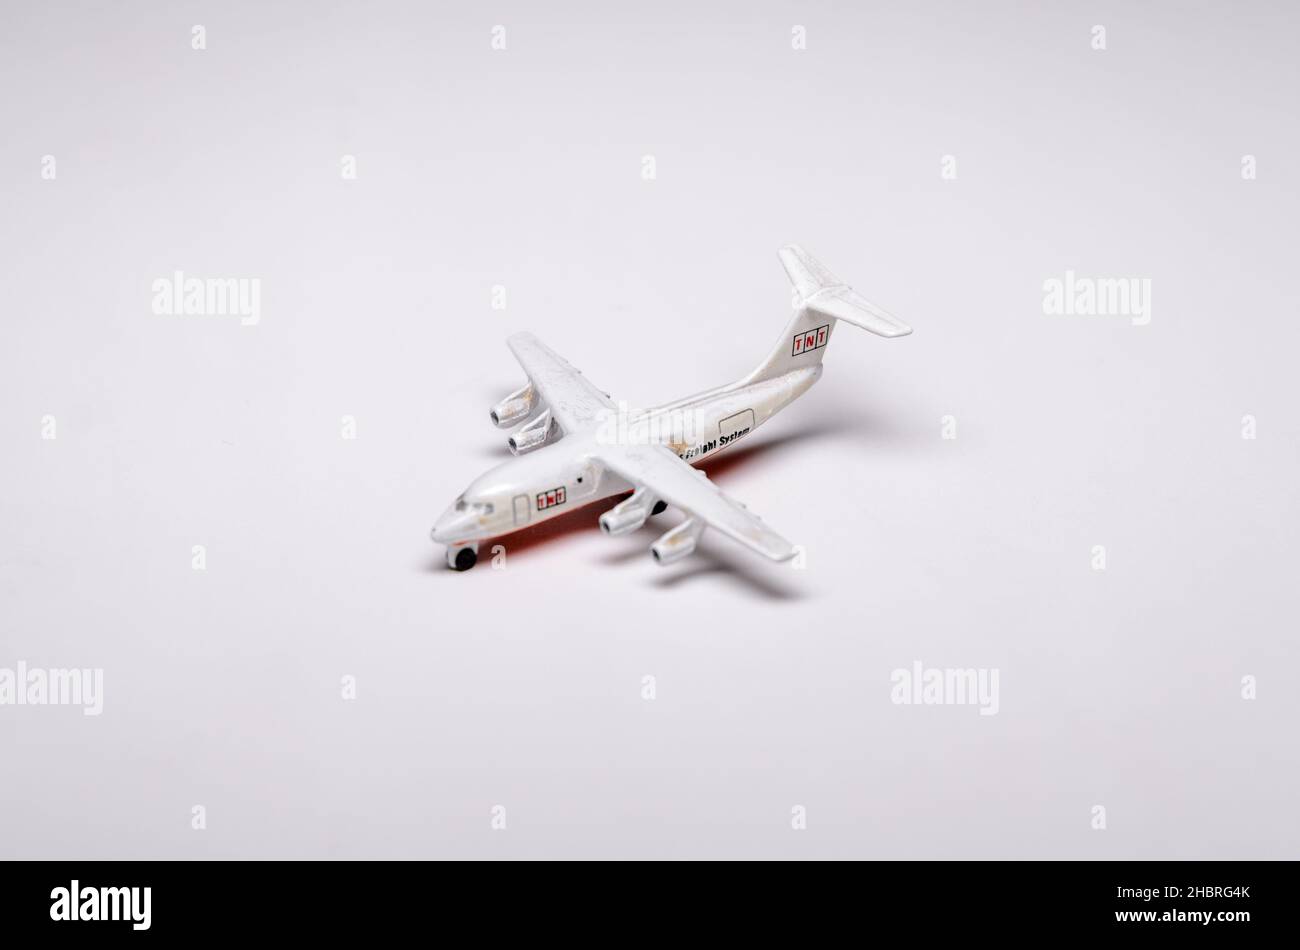 Model of the British Aerospace 146 (Bae-146) with TNT Air Cargo livery, close-up view on white background Stock Photo